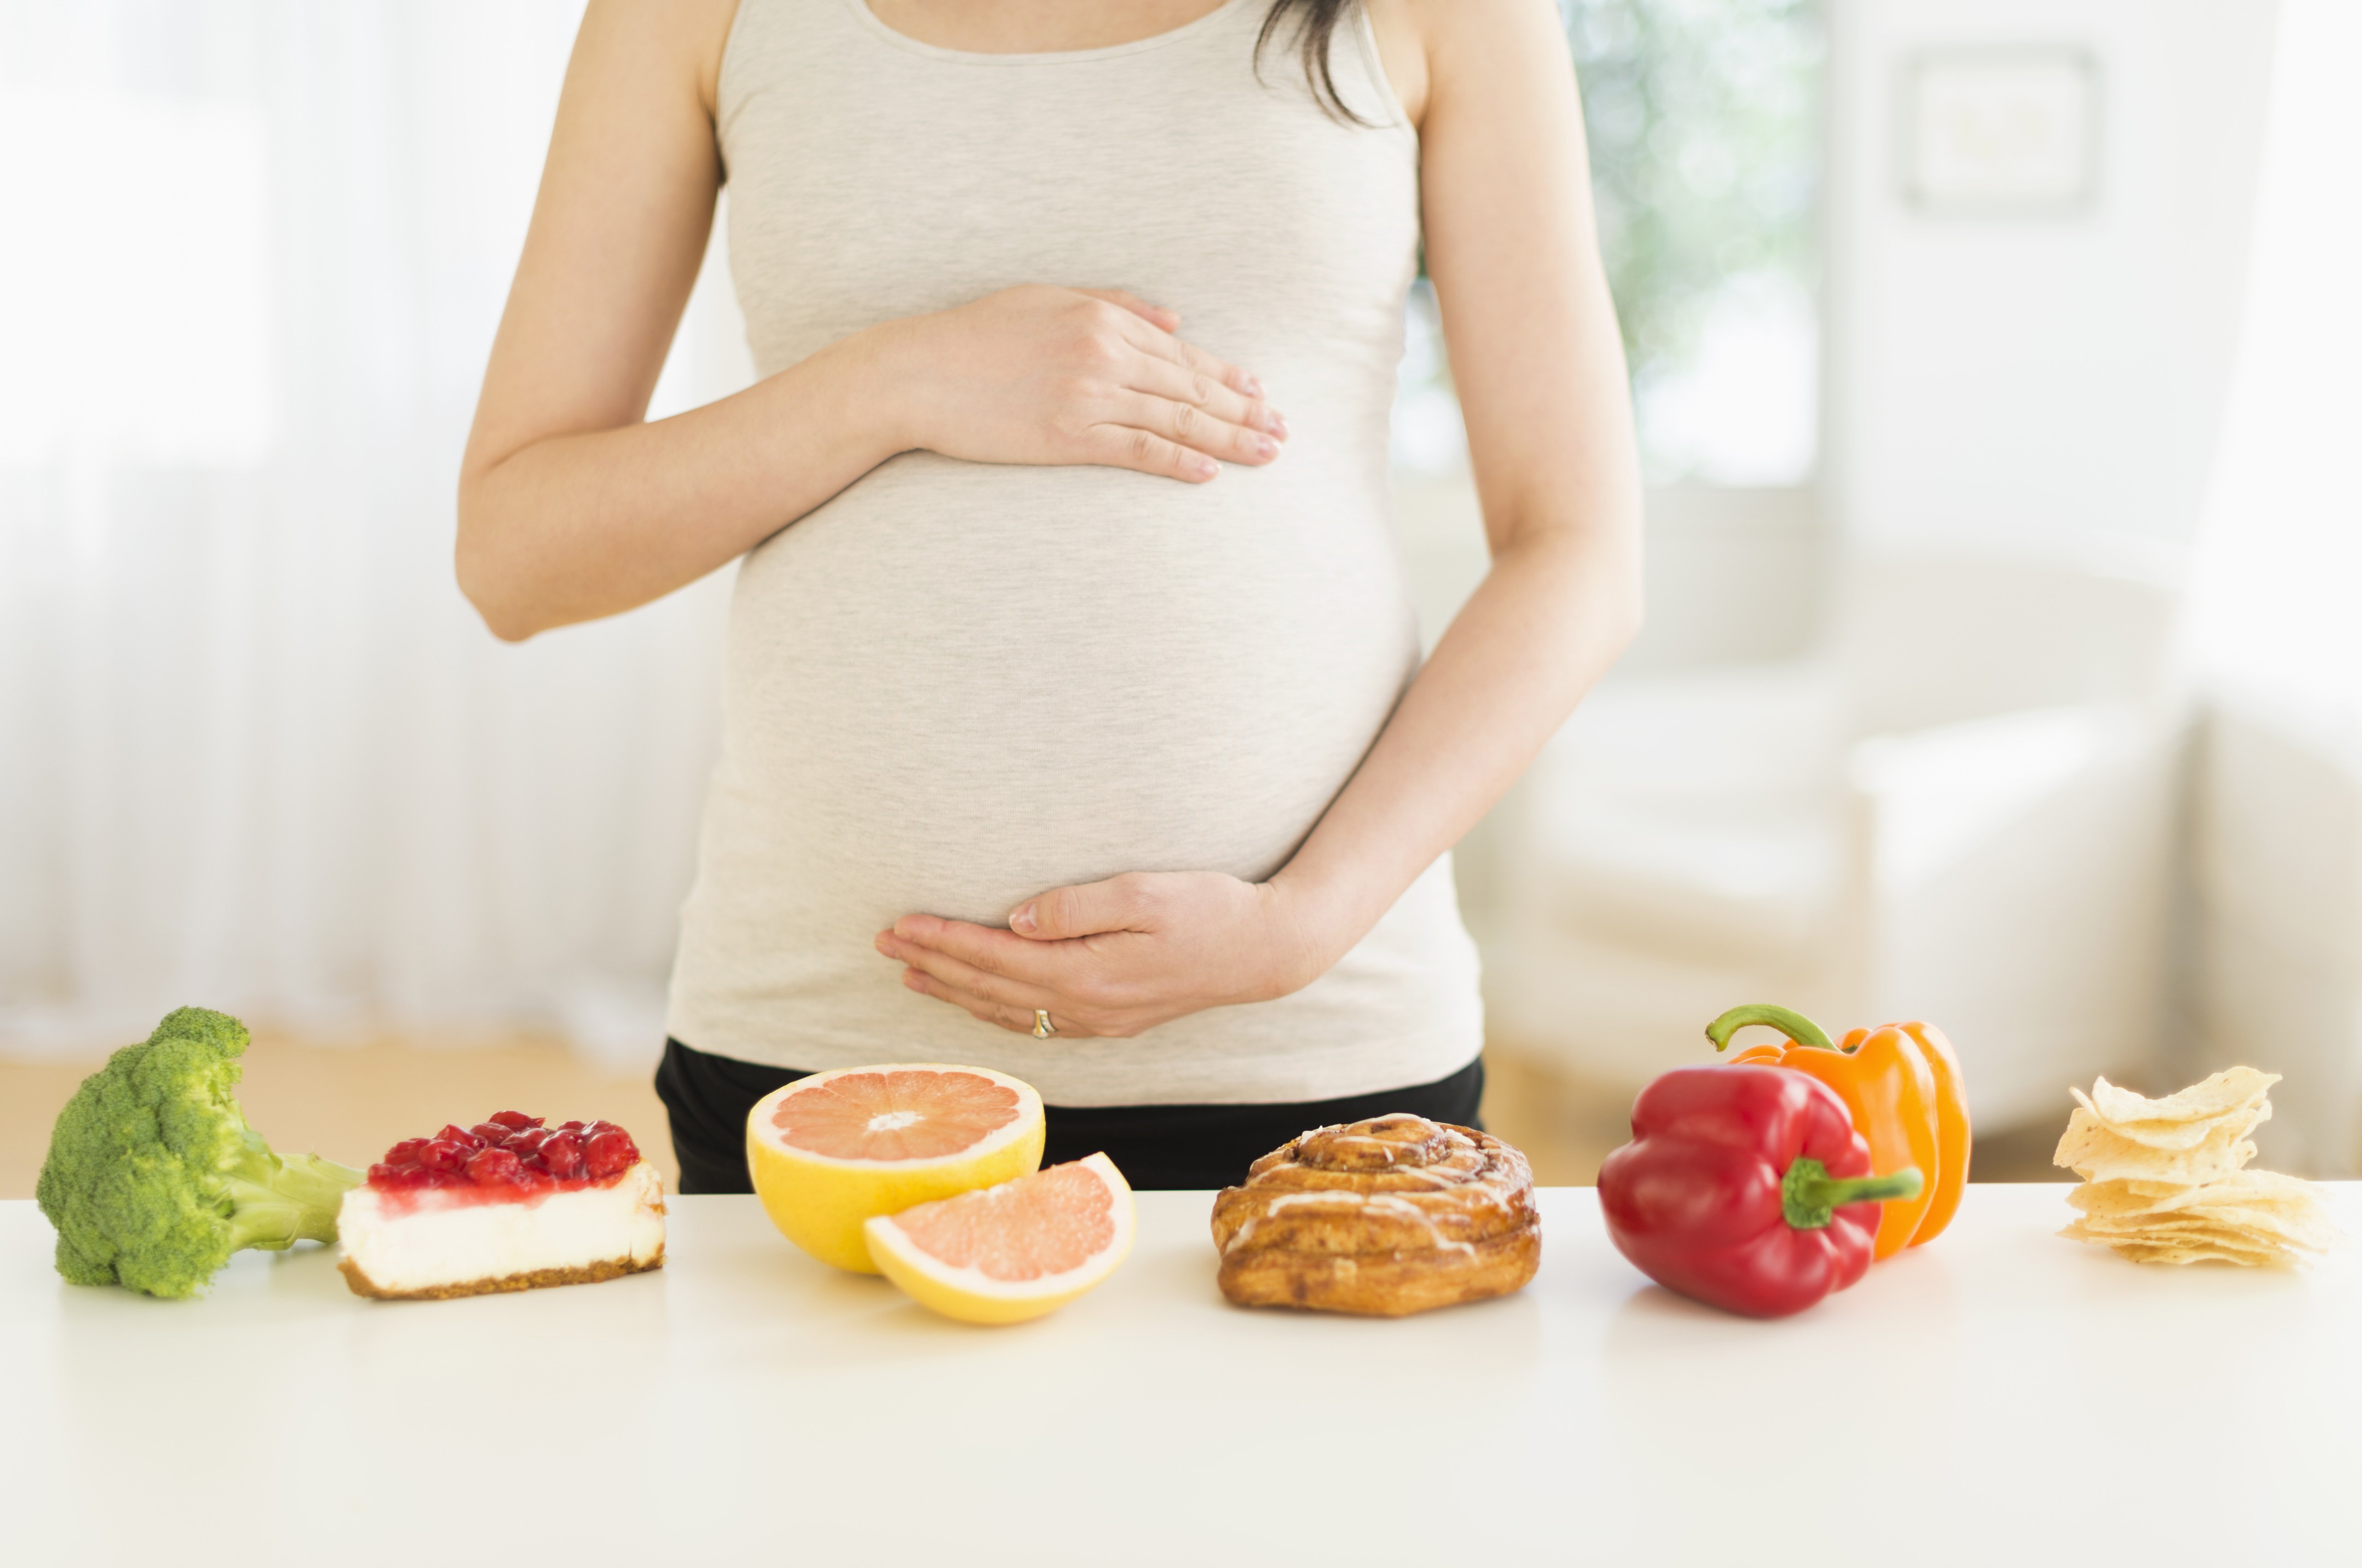 pregnancy and food choices